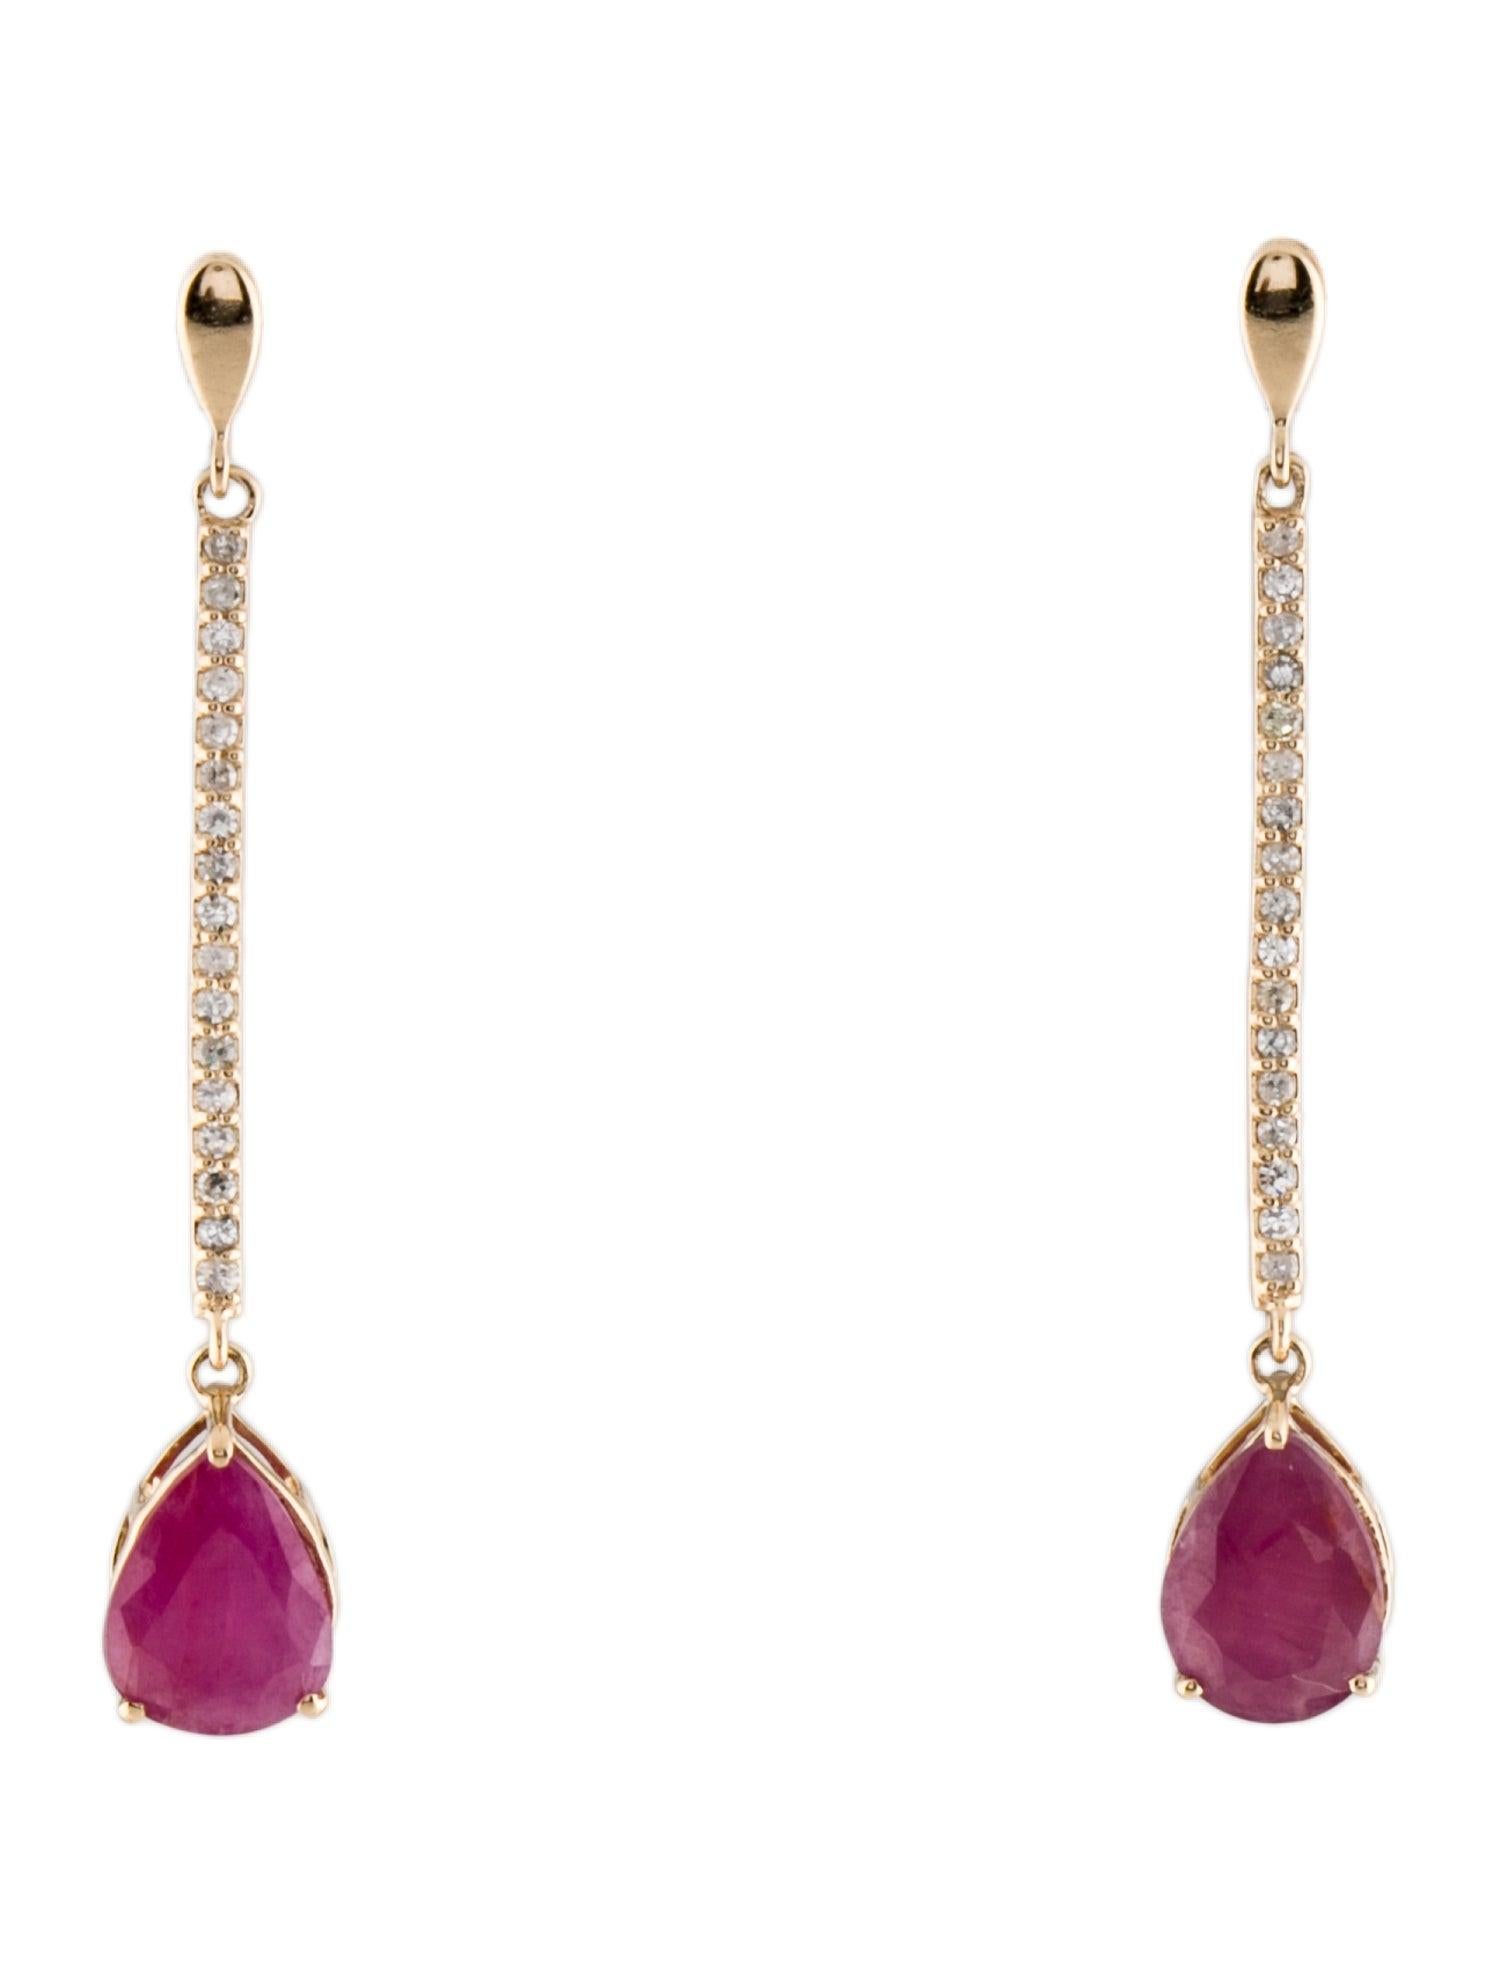 Discover the allure of our exquisite 14K Yellow Gold Drop Earrings, featuring a captivating ensemble of rubies and diamonds. These earrings are a harmonious blend of color and sparkle, designed to elevate any look with their refined elegance. At the